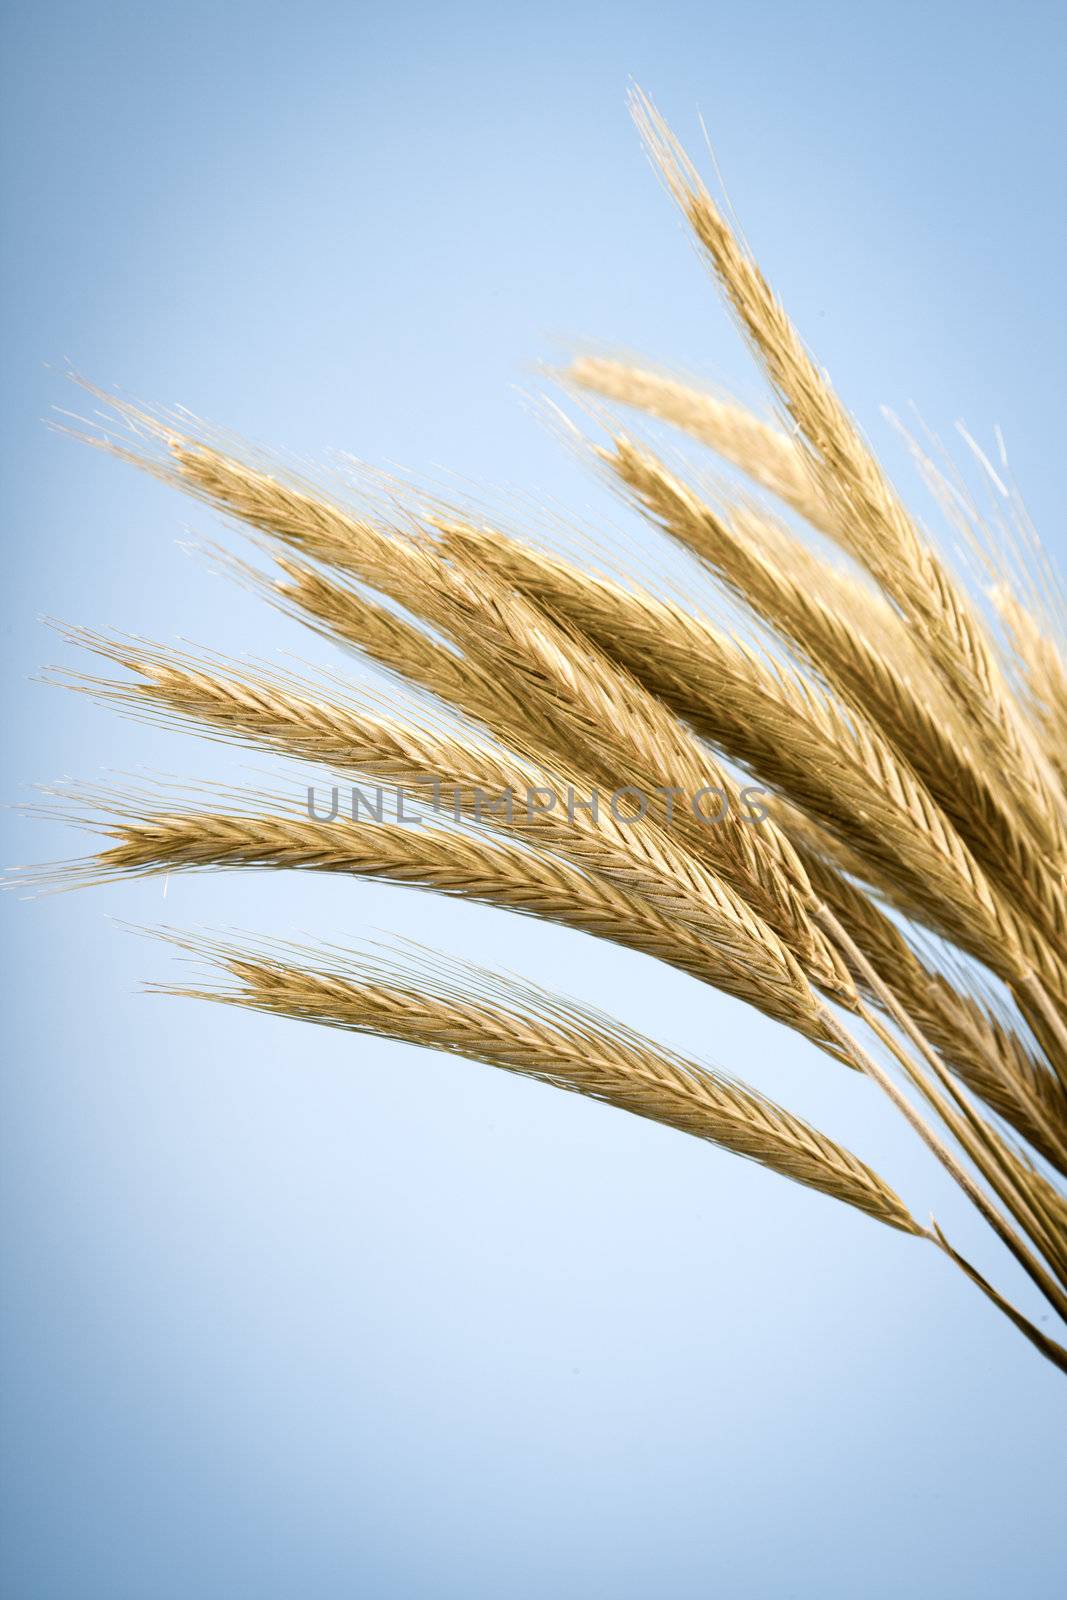 yellow ears of wheat, on blue background by motorolka